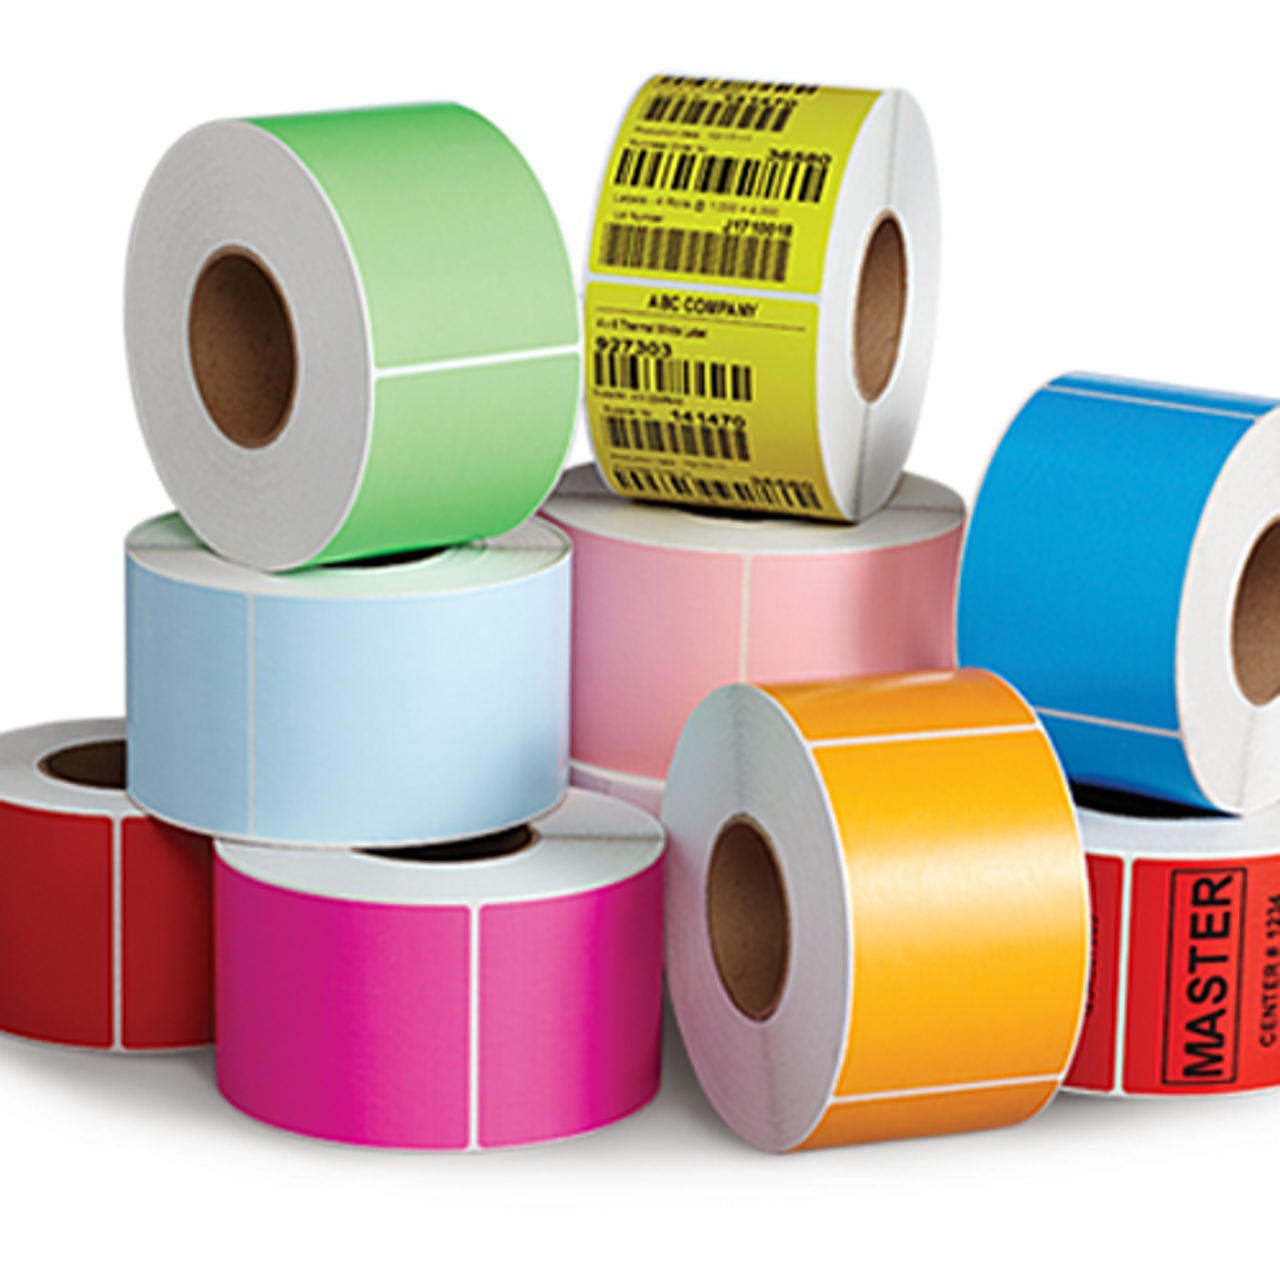 Buy 100mm x 100mm Thermal Transfer 400 Lables/Roll - 25mm core